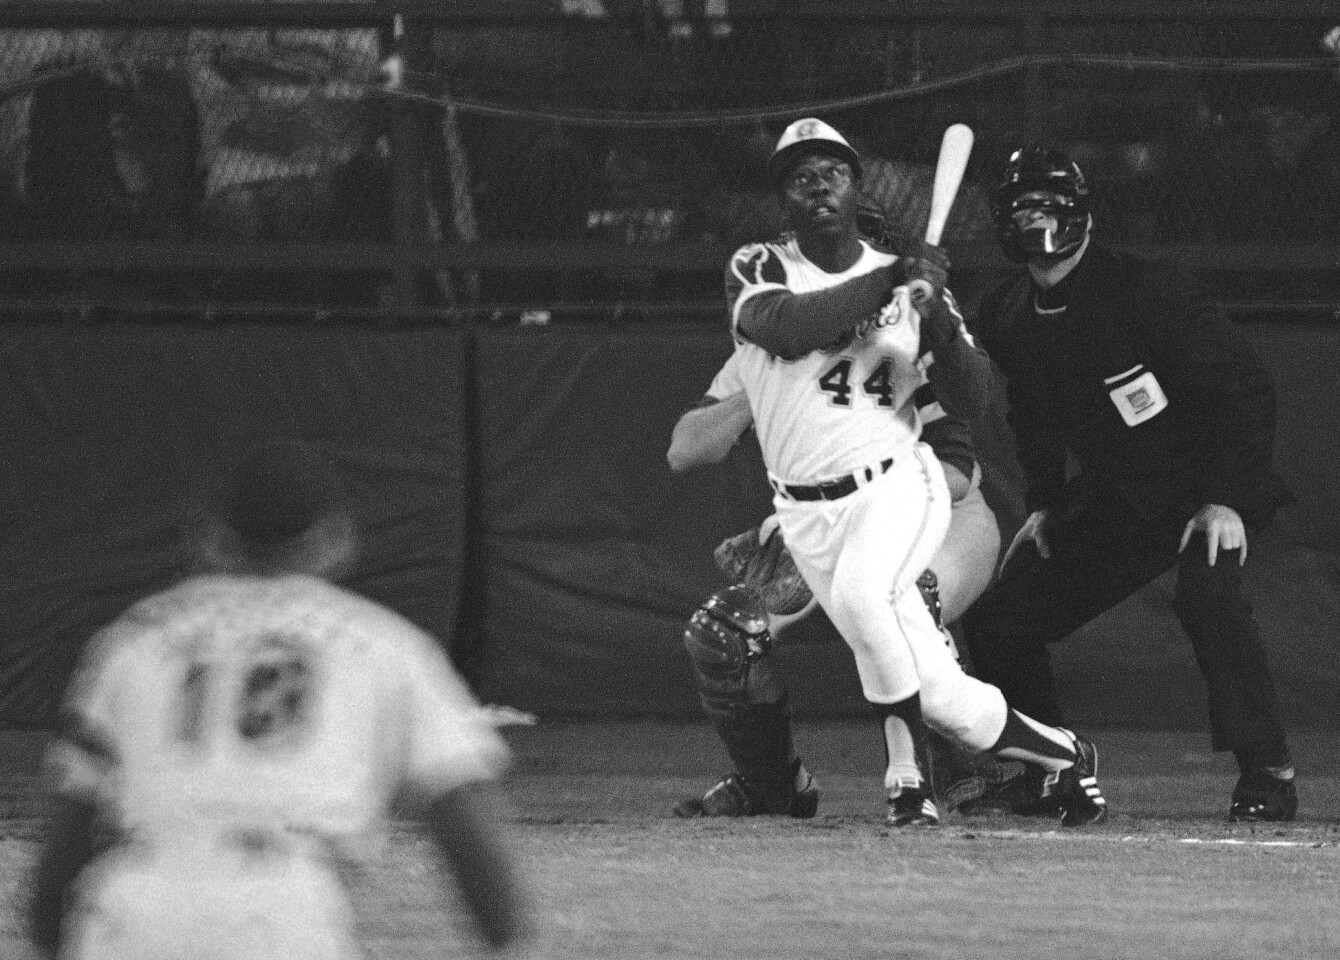 ** FILE ** Atlanta Braves' Hank Aaron eyes the flight of the ball after hitting his 715th career homer in a game against the Los Angeles Dodgers in Atlanta, Ga., in this April 8, 1974 file photo. Dodgers pitcher Al Downing, catcher Joe Ferguson and umpire David Davidson look on. (AP Photo/Harry Harrris)